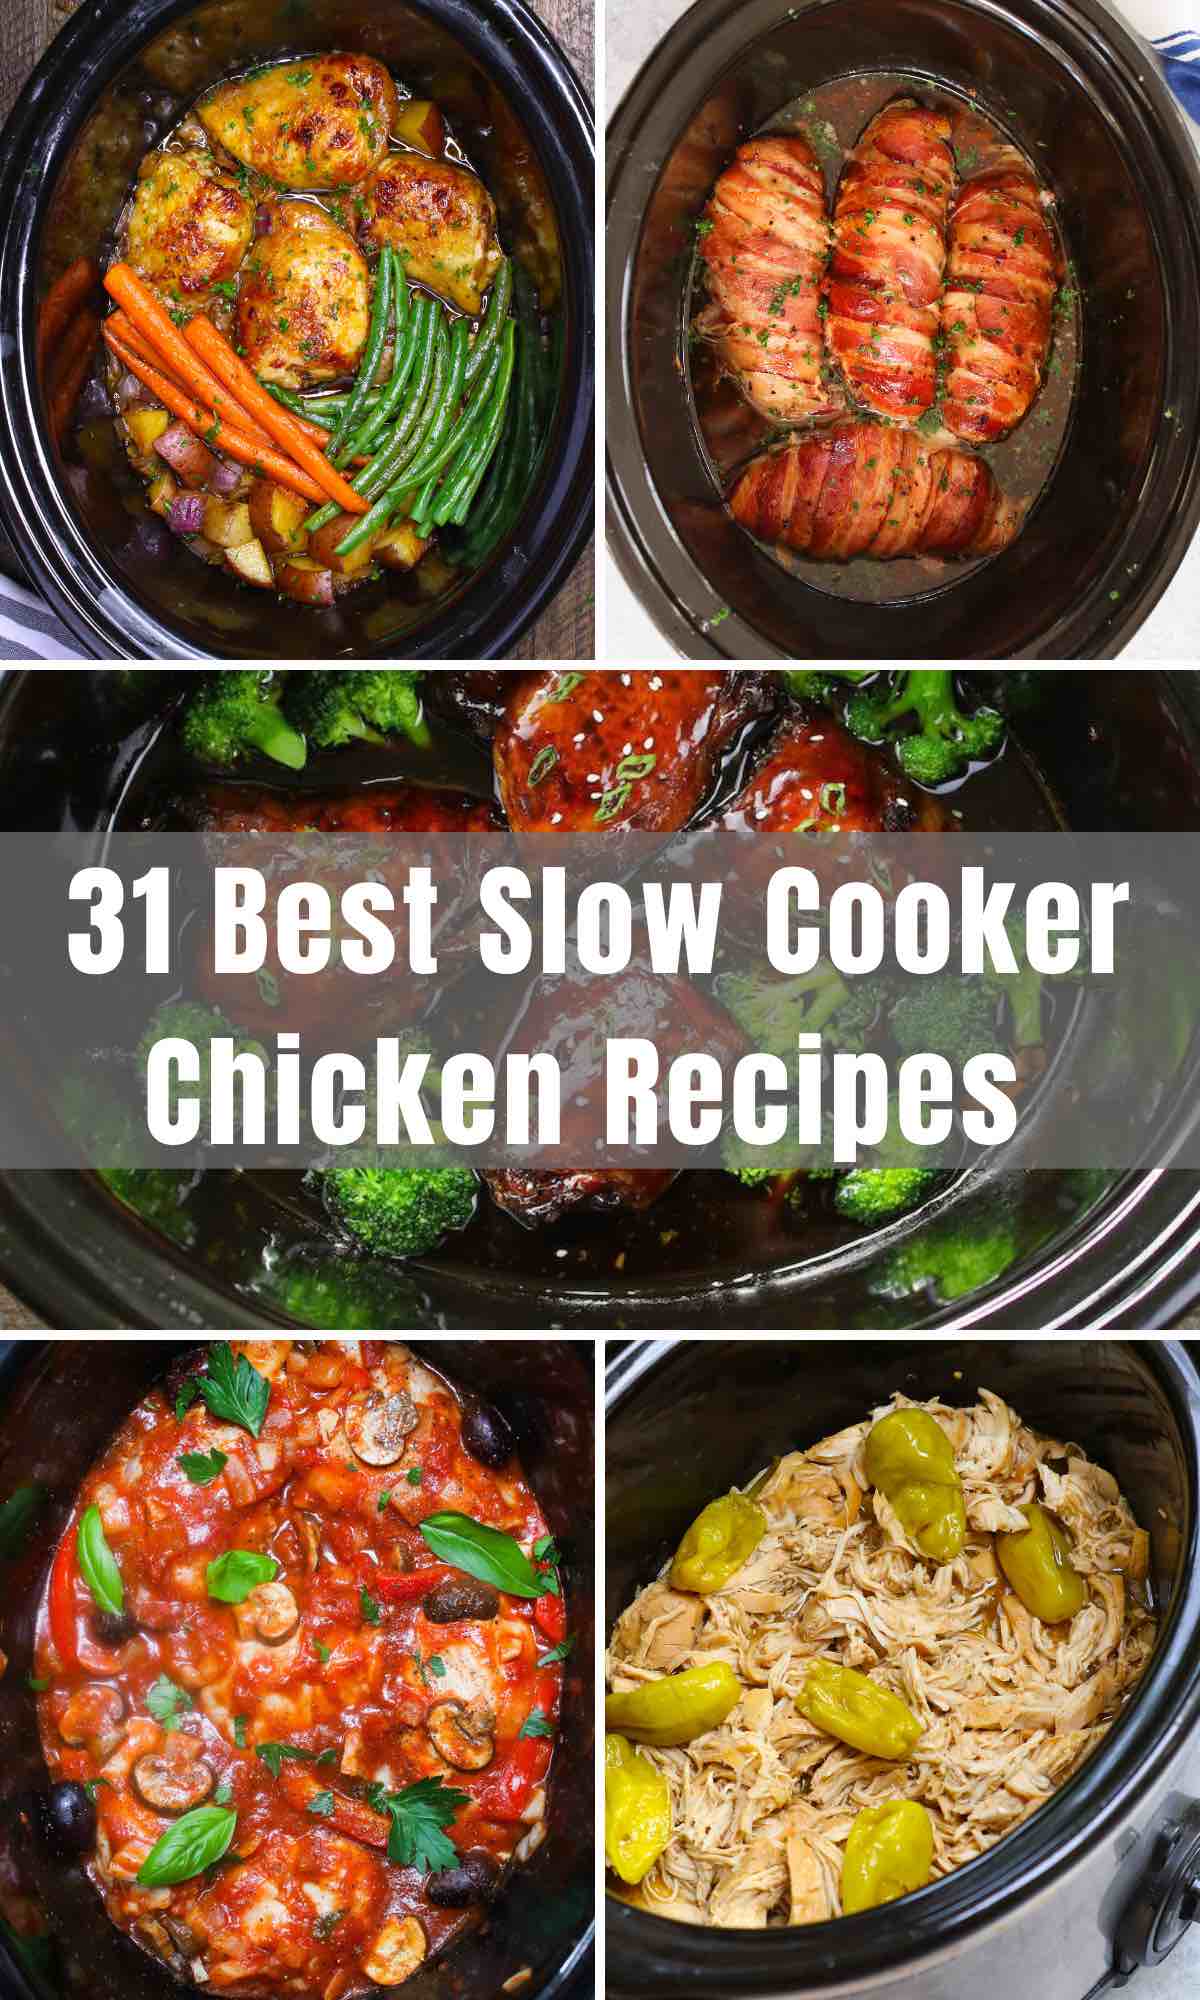 The crockpot is so versatile and you can rely on it for making all your favorite Slow Cooker Chicken Recipes! We’ll delve into the chicken breasts, chicken thighs, whole chicken, healthy, and popular chicken recipes…easily cooked in a slow cooker!